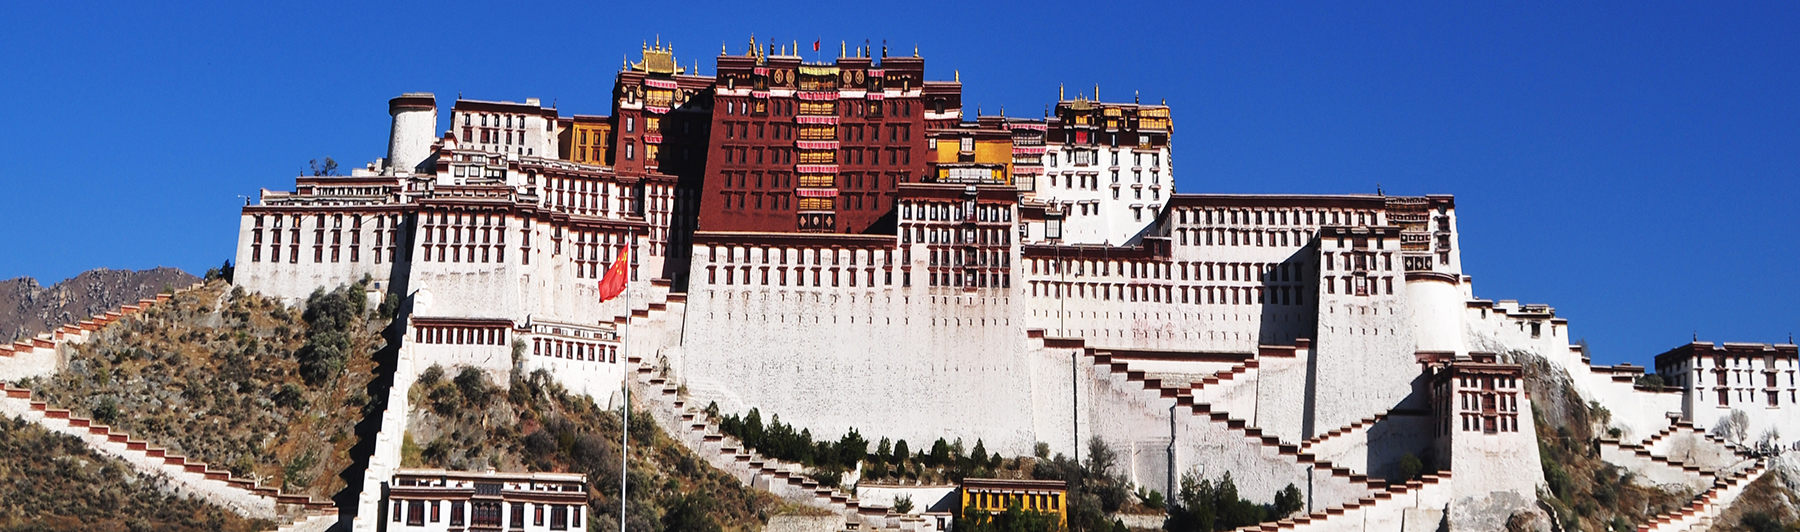 tibet tour package